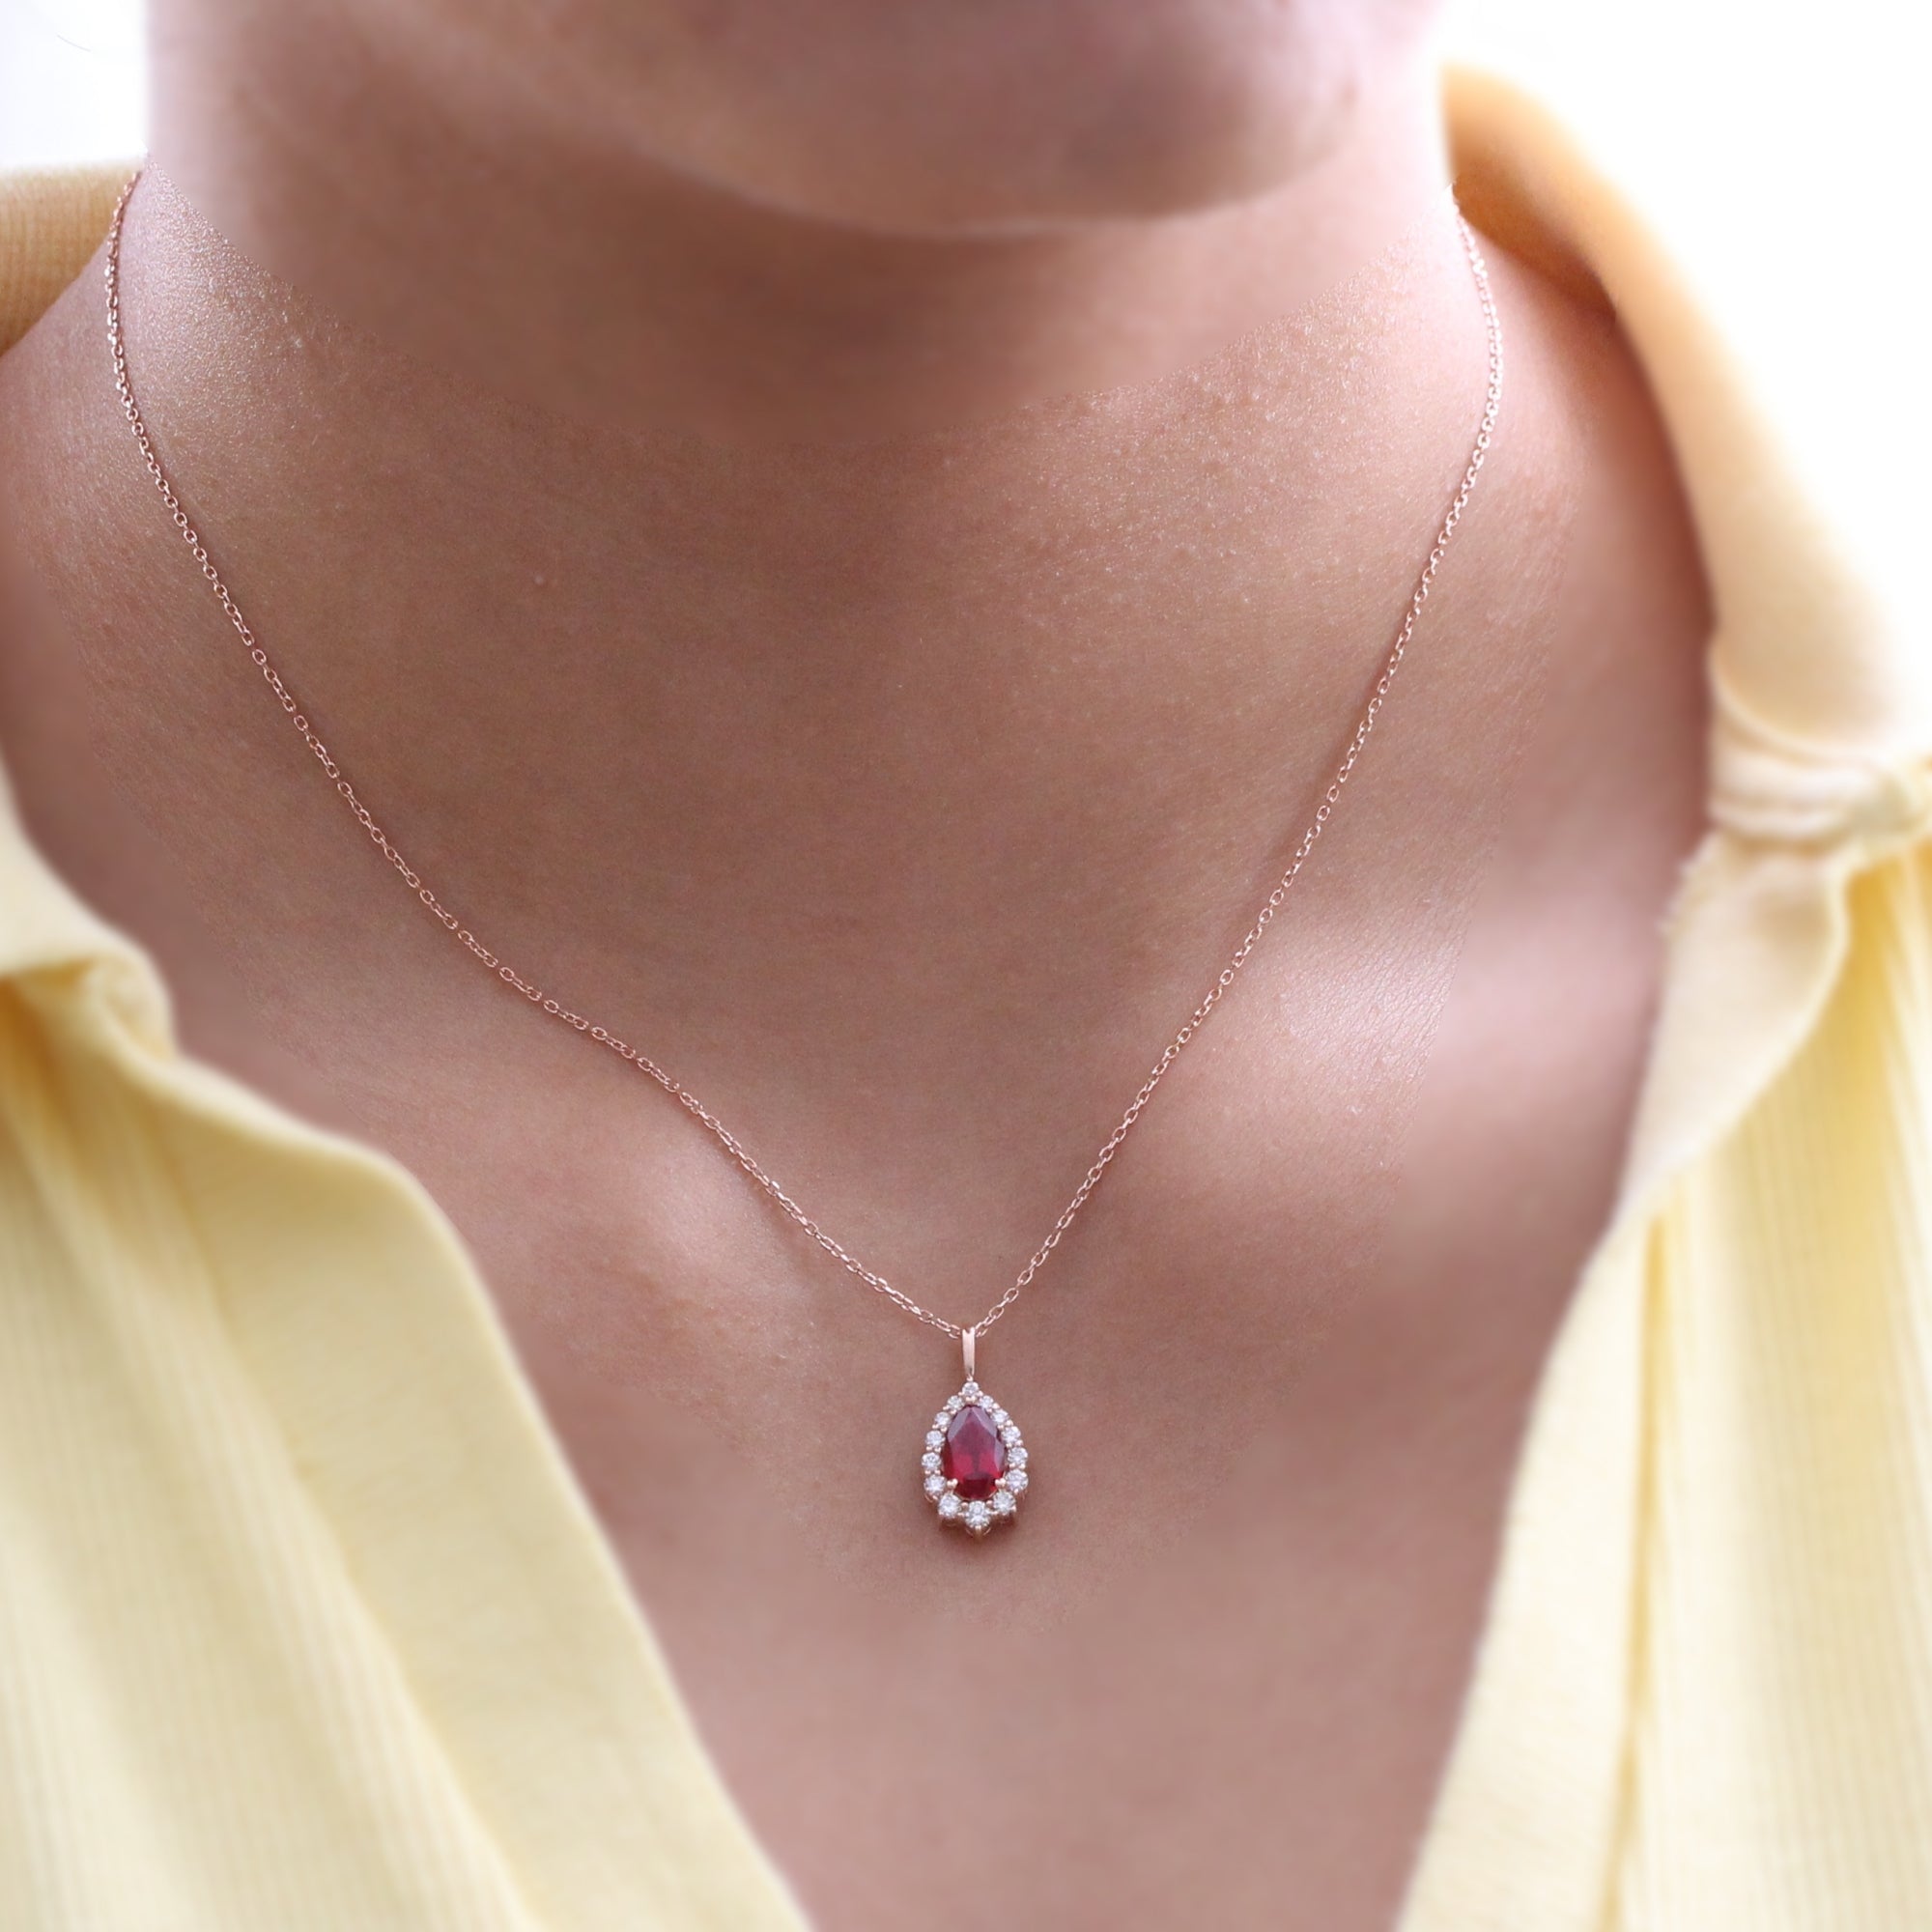 Pear Shaped Ruby Necklace Rose Gold Halo Diamond Drop Pendant Chain